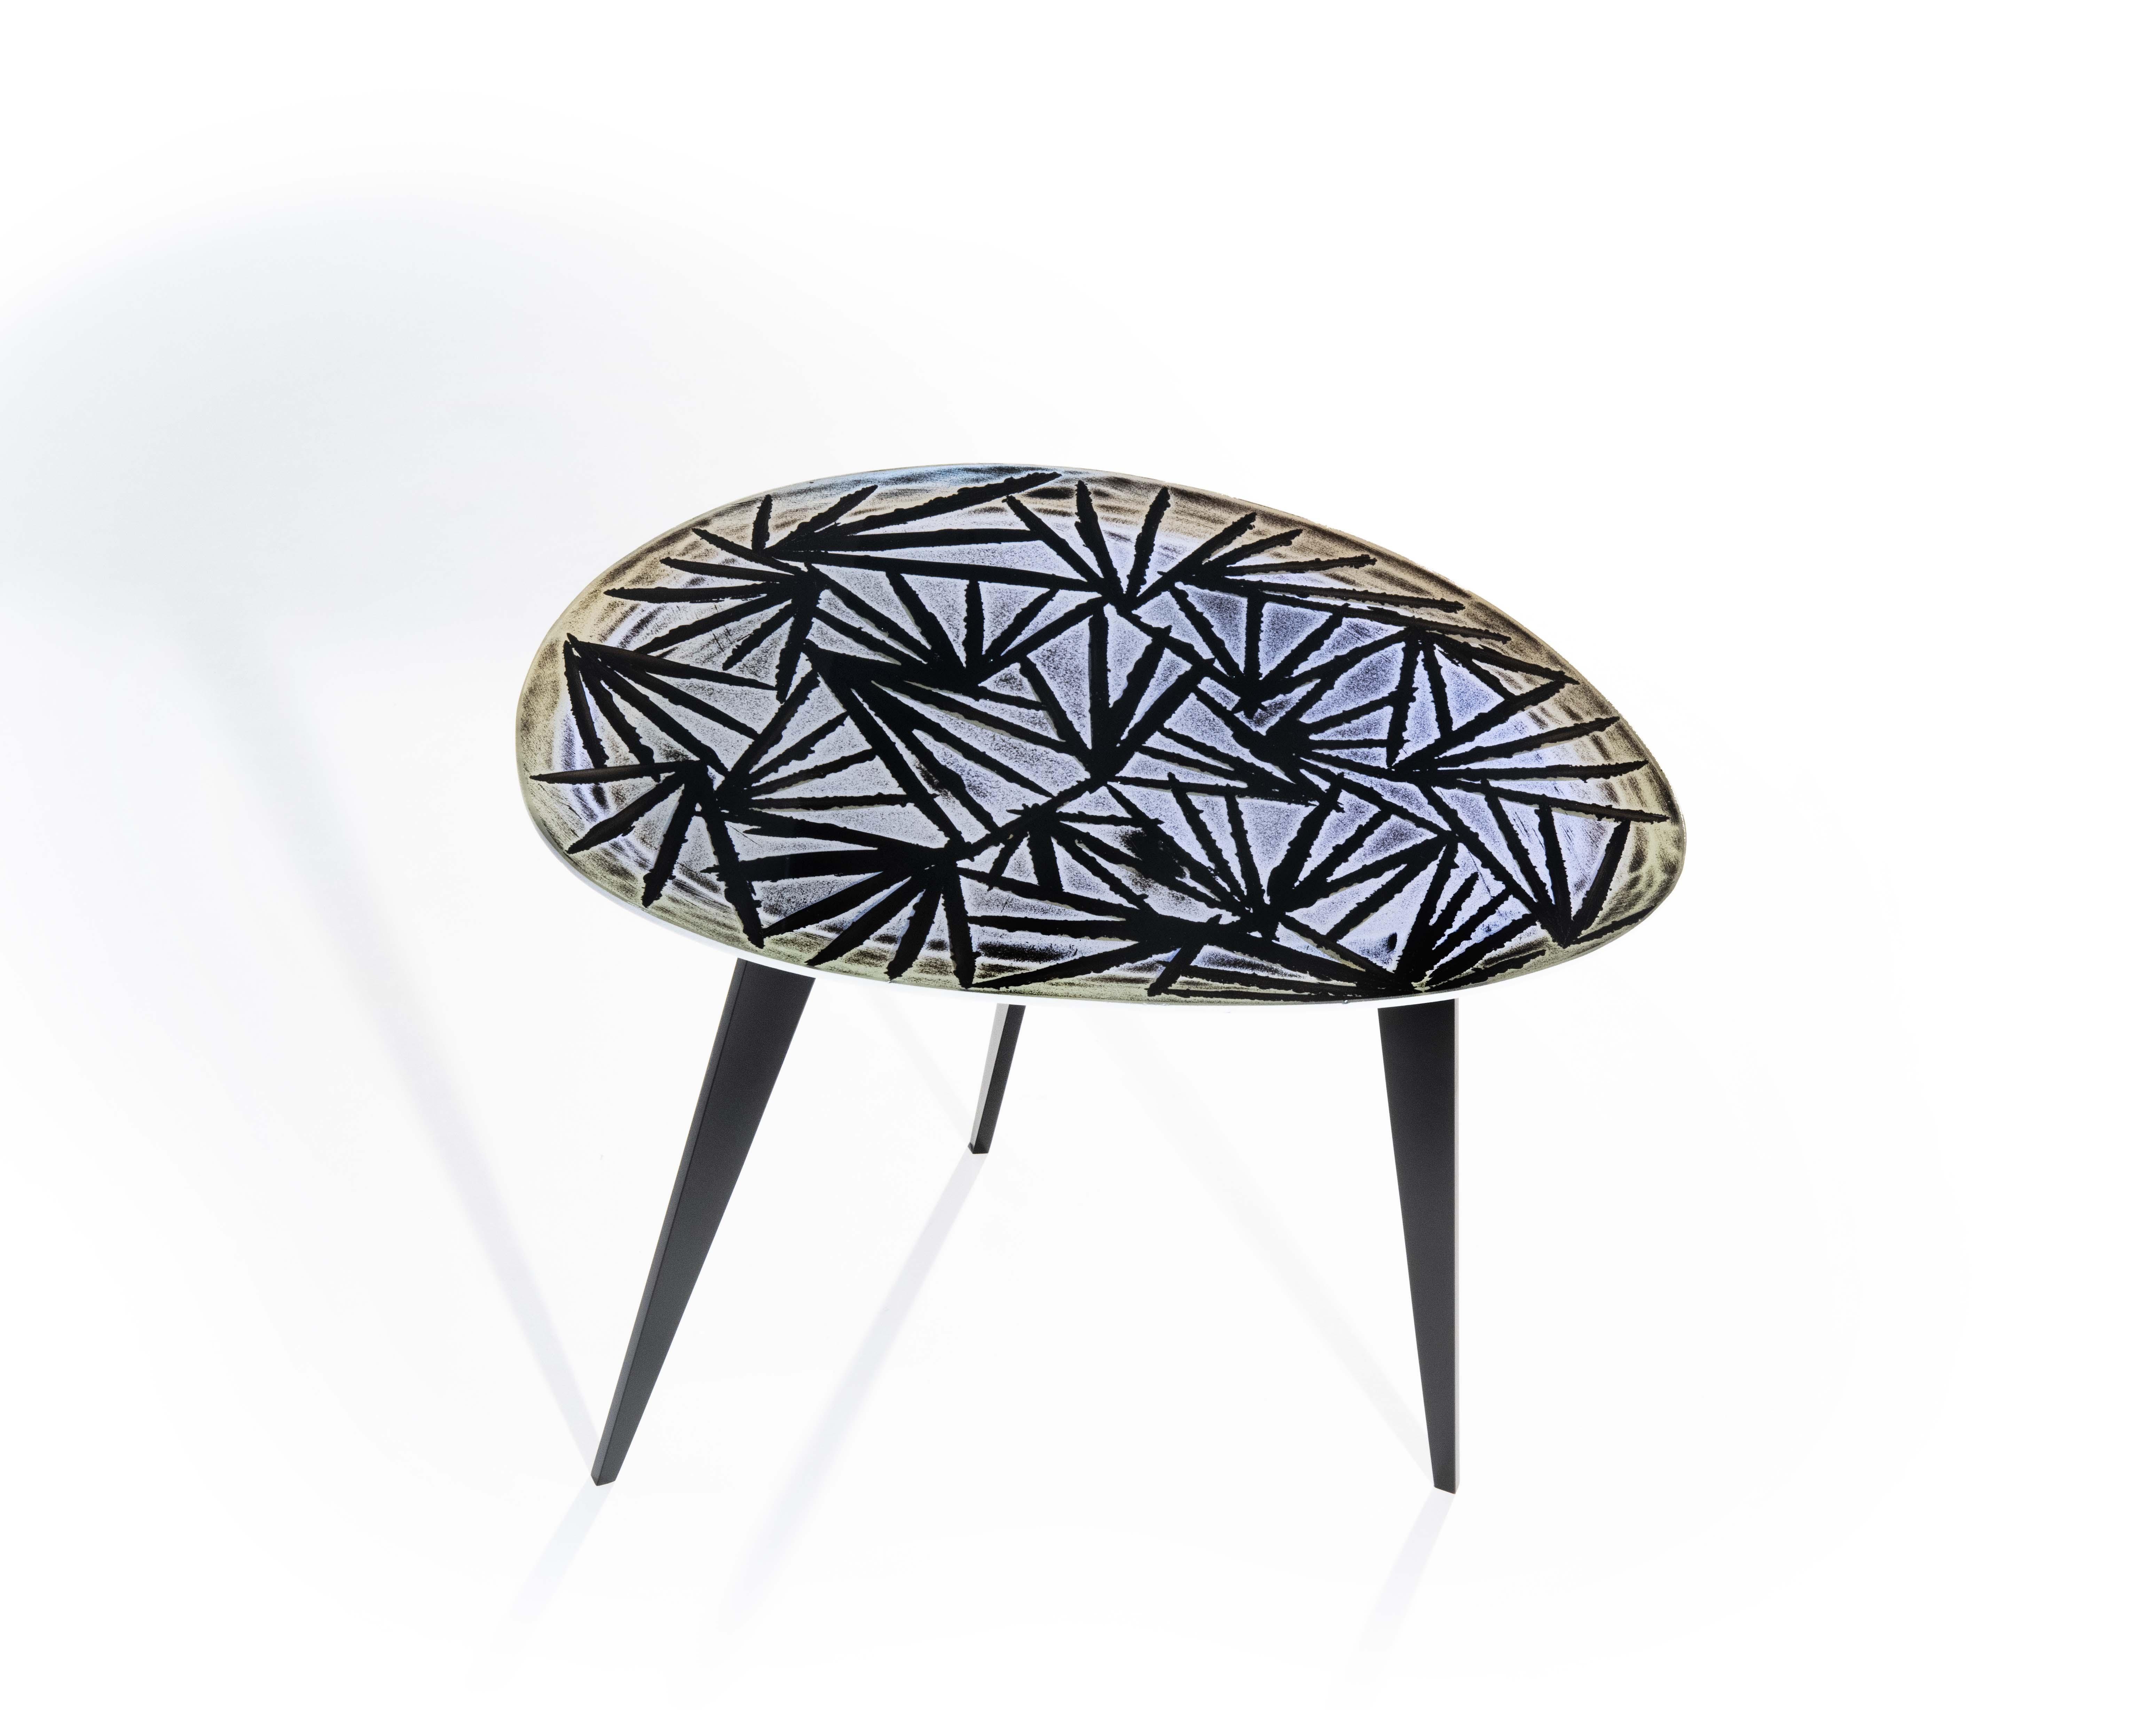 Hand-Crafted Contemporary by Ghirò Studio 'Monten' Coffee Table Iridescent Crystal and Brass For Sale